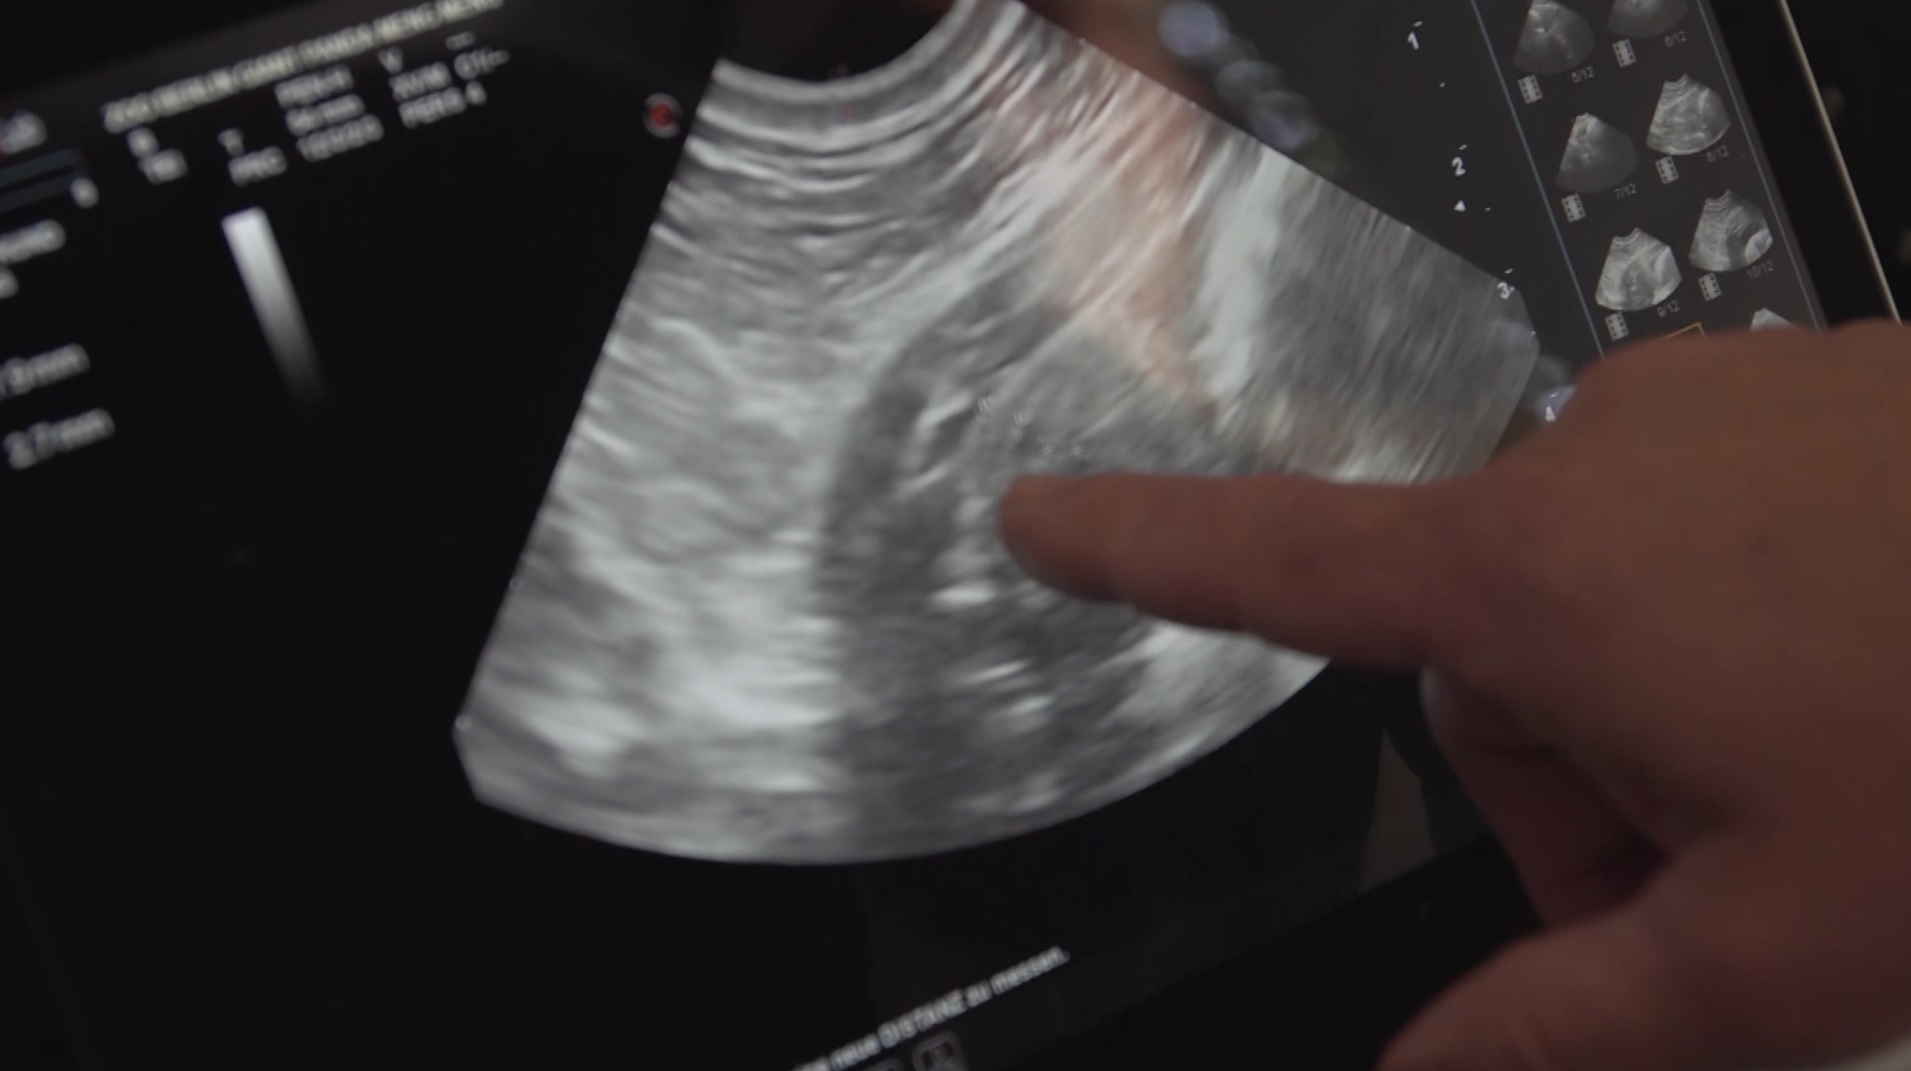 The ultrasound performed on Meng Meng the panda appears to show she is pregnant